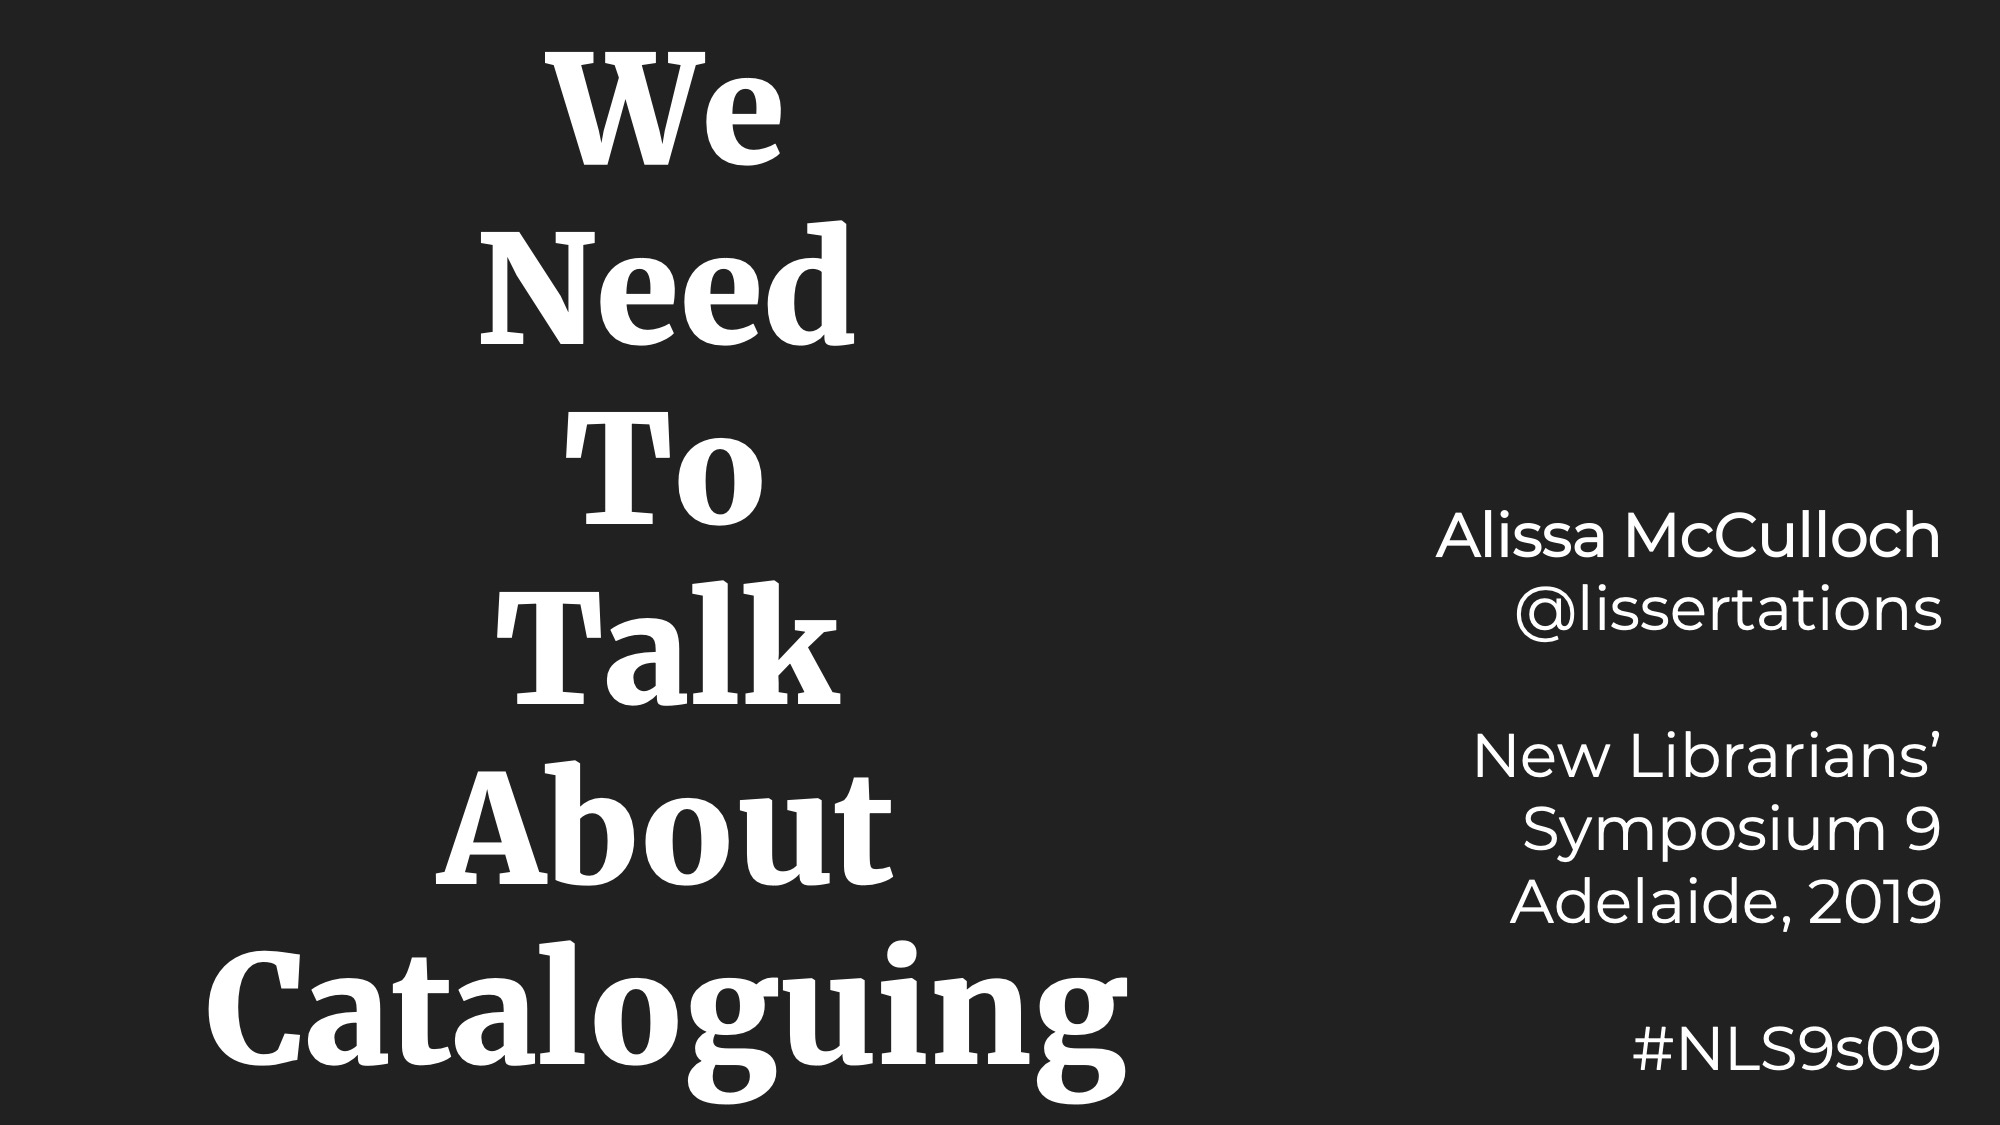 We Need To Talk About Cataloguing / Alissa McCulloch @lissertations / New Librarians' Symposium 9 Adelaide, 2019 / #NLS9s09